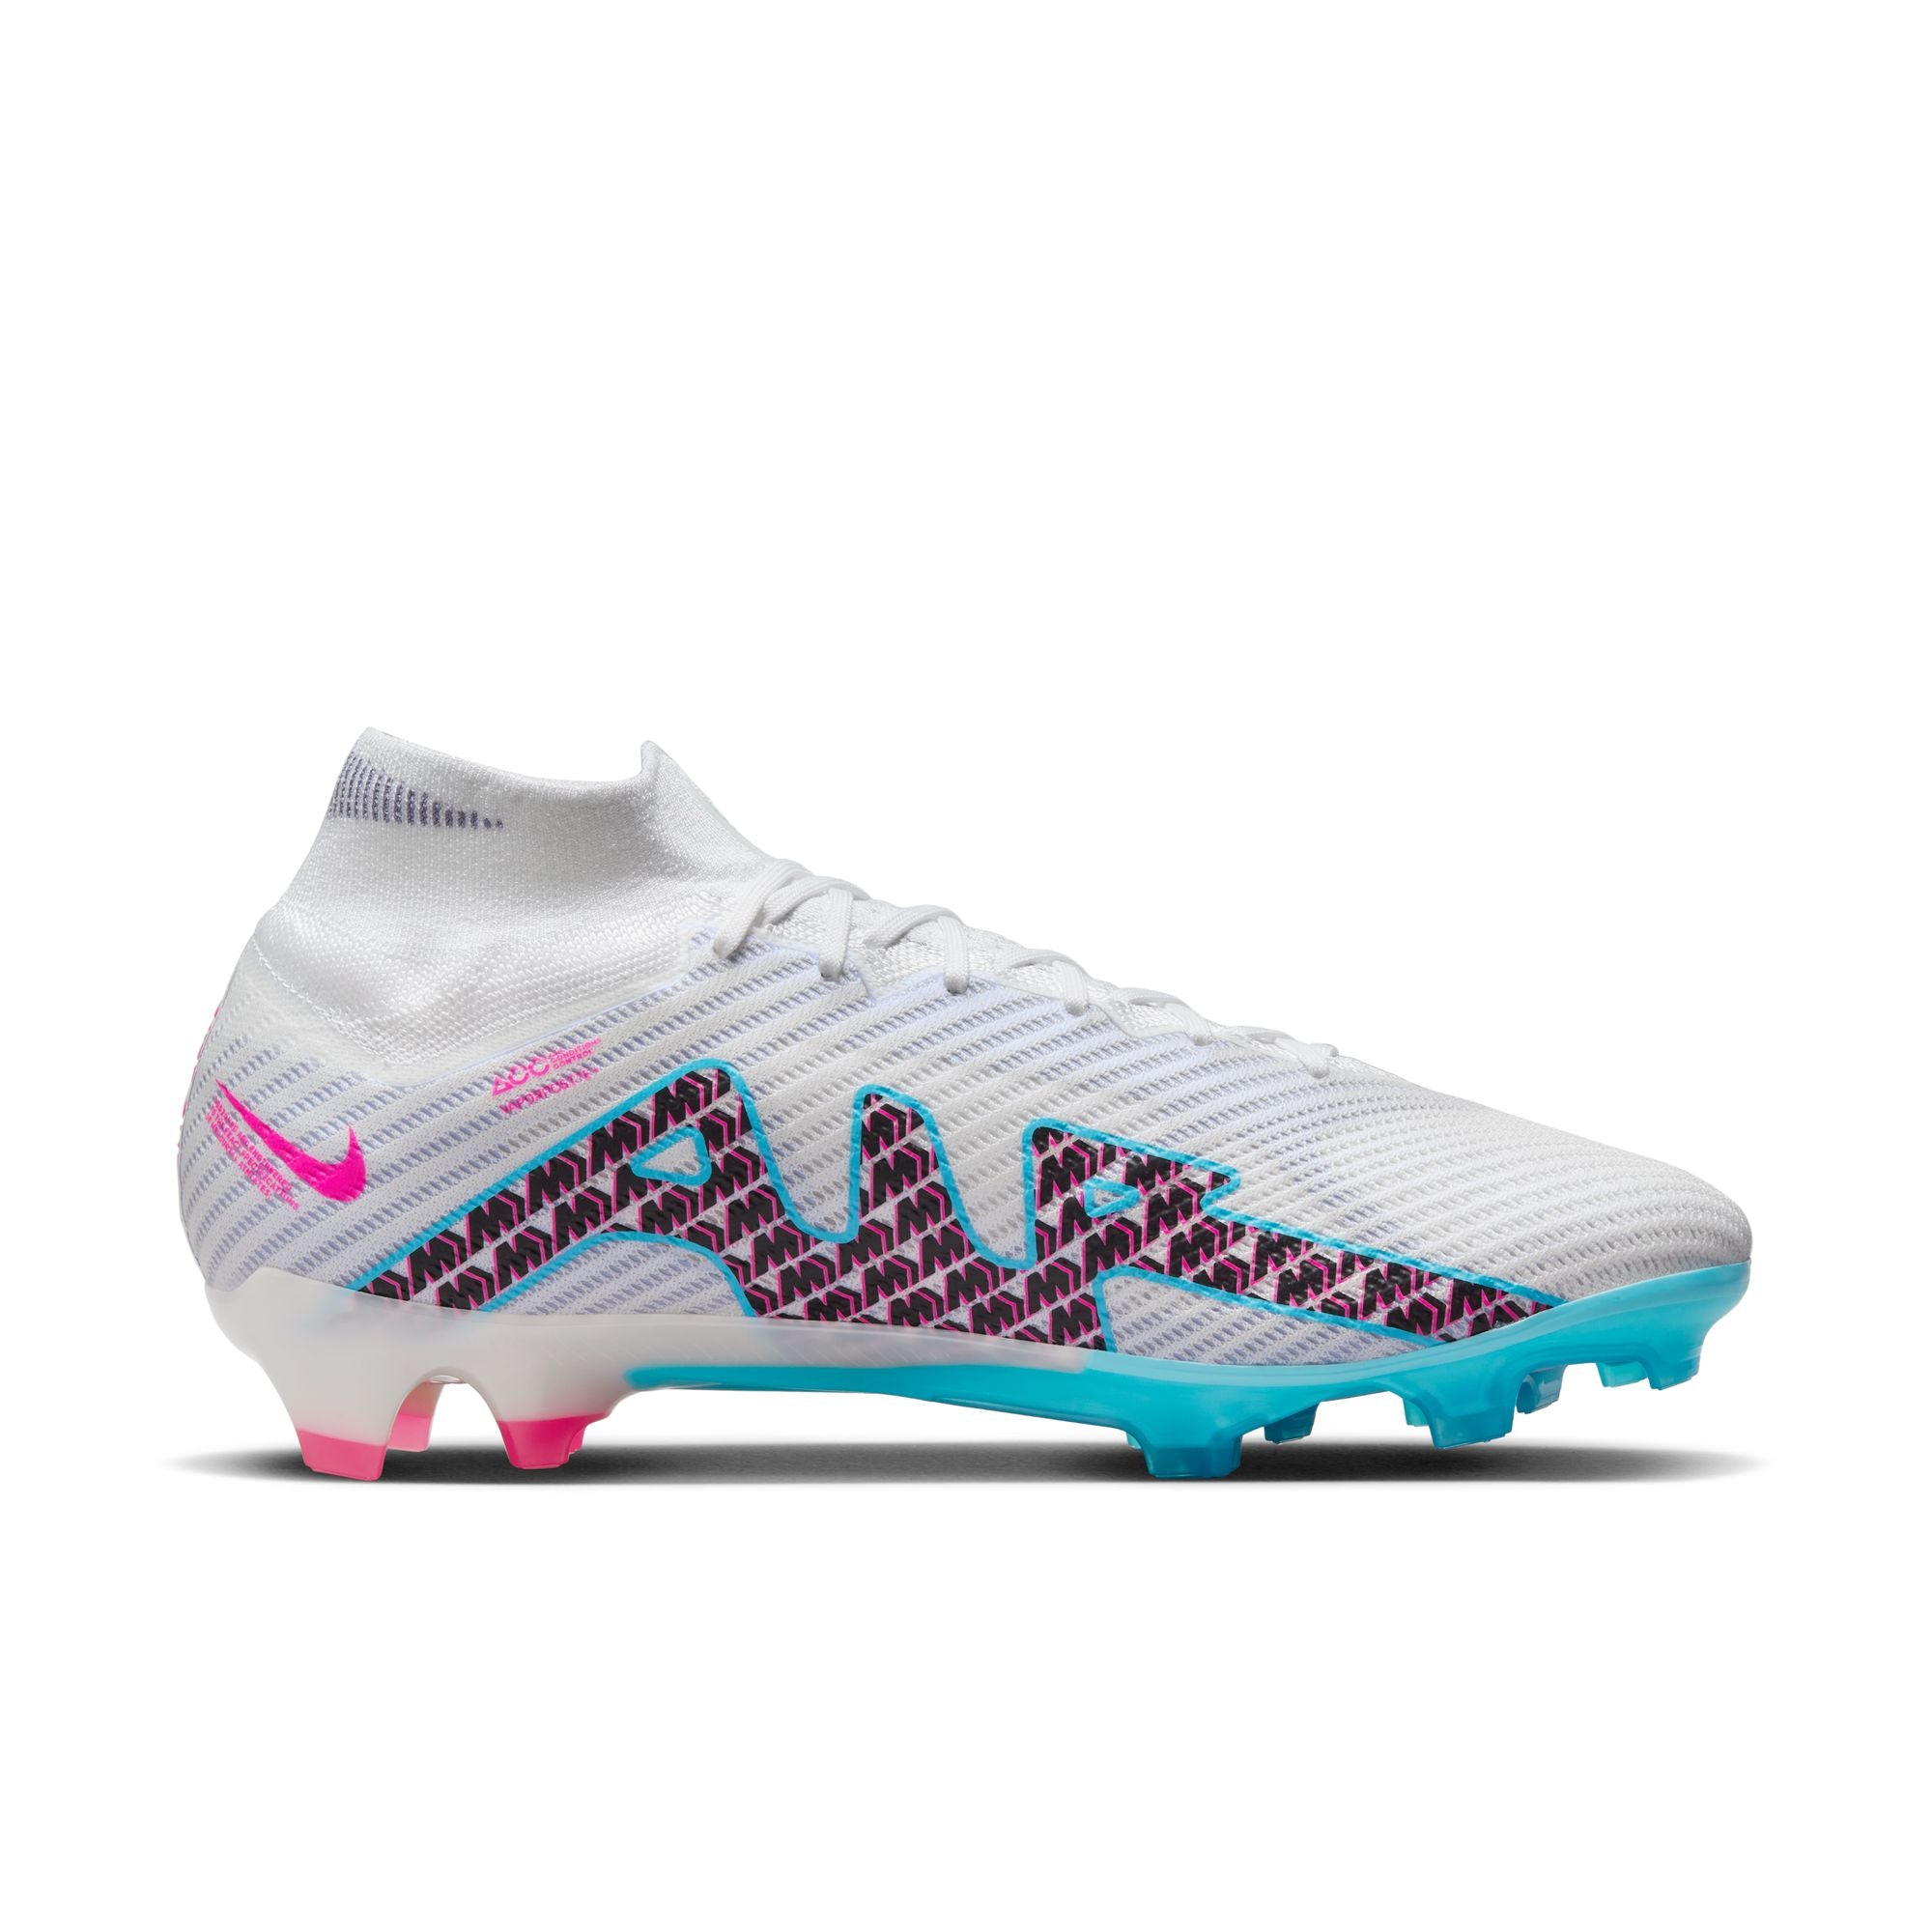 Zoom Superfly 9 Elite FG Firm-Ground Cleats